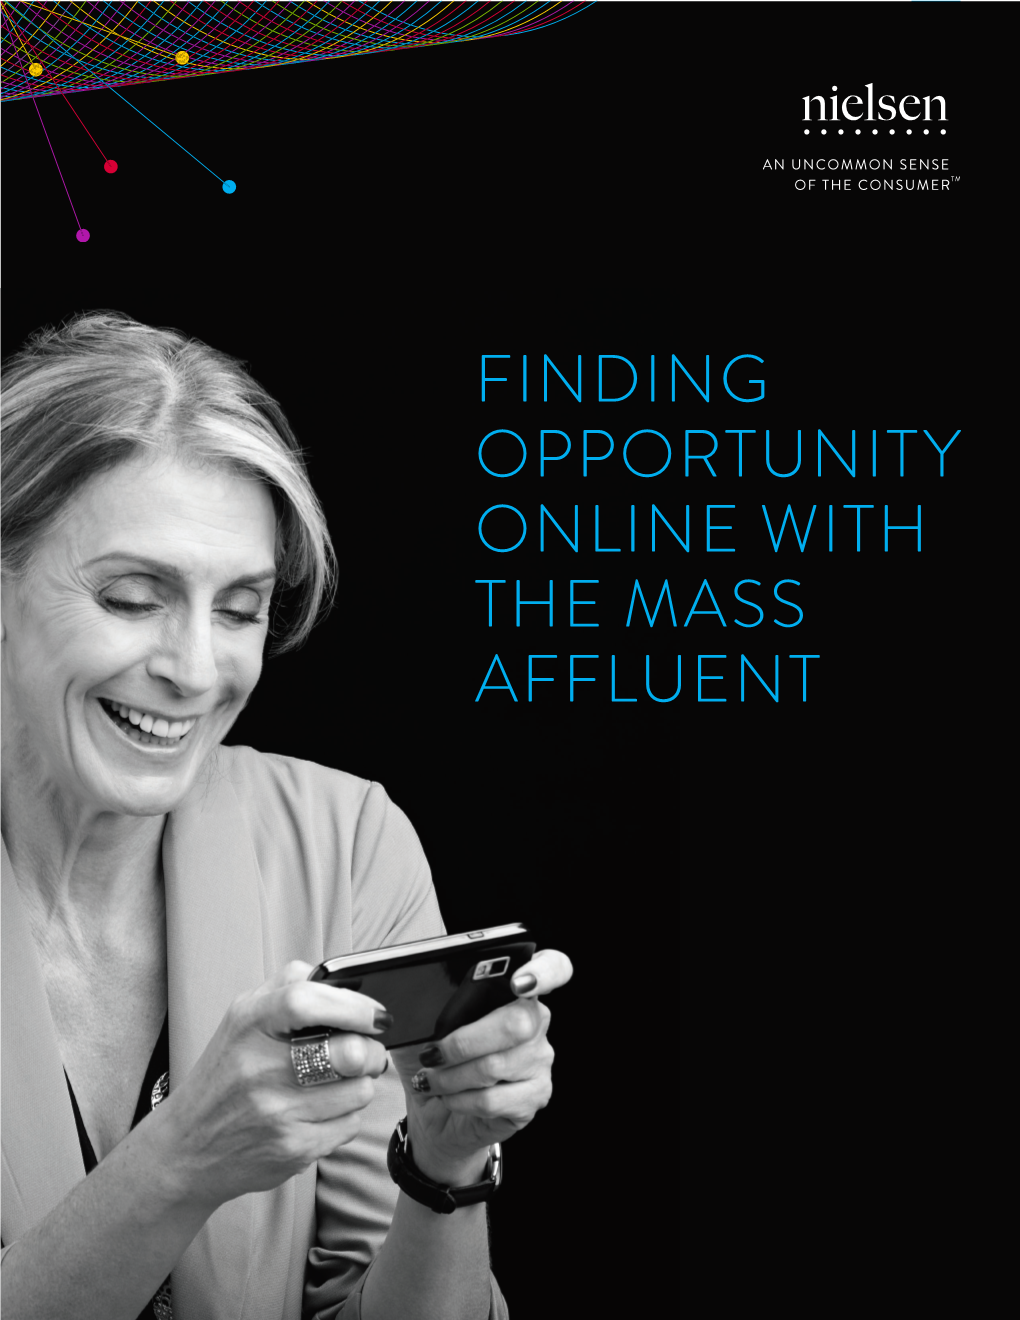 Finding Opportunity Online with the Mass Affluent